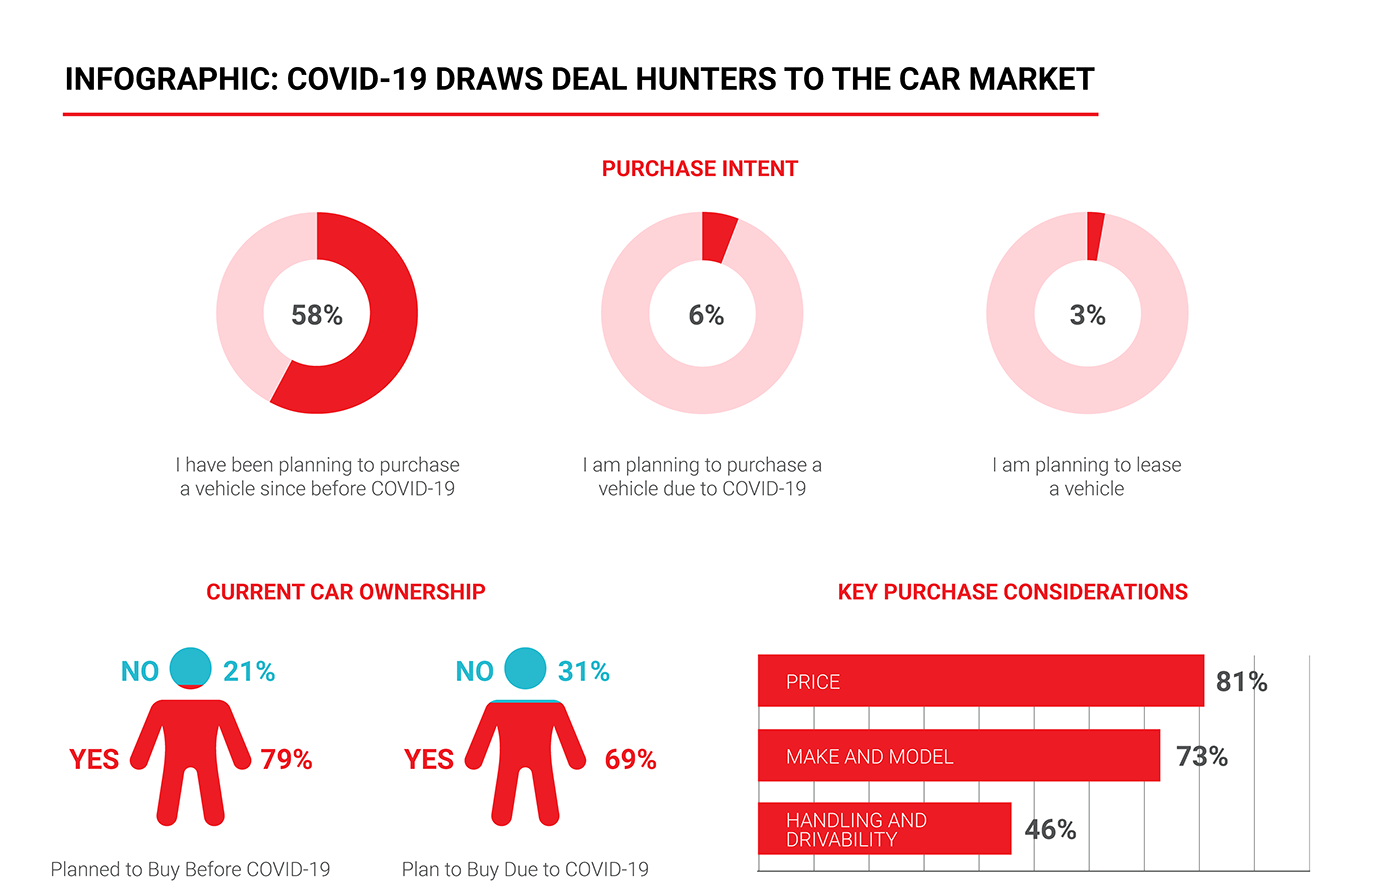 COVID-19 Draws Deal Hunters to the Car Market